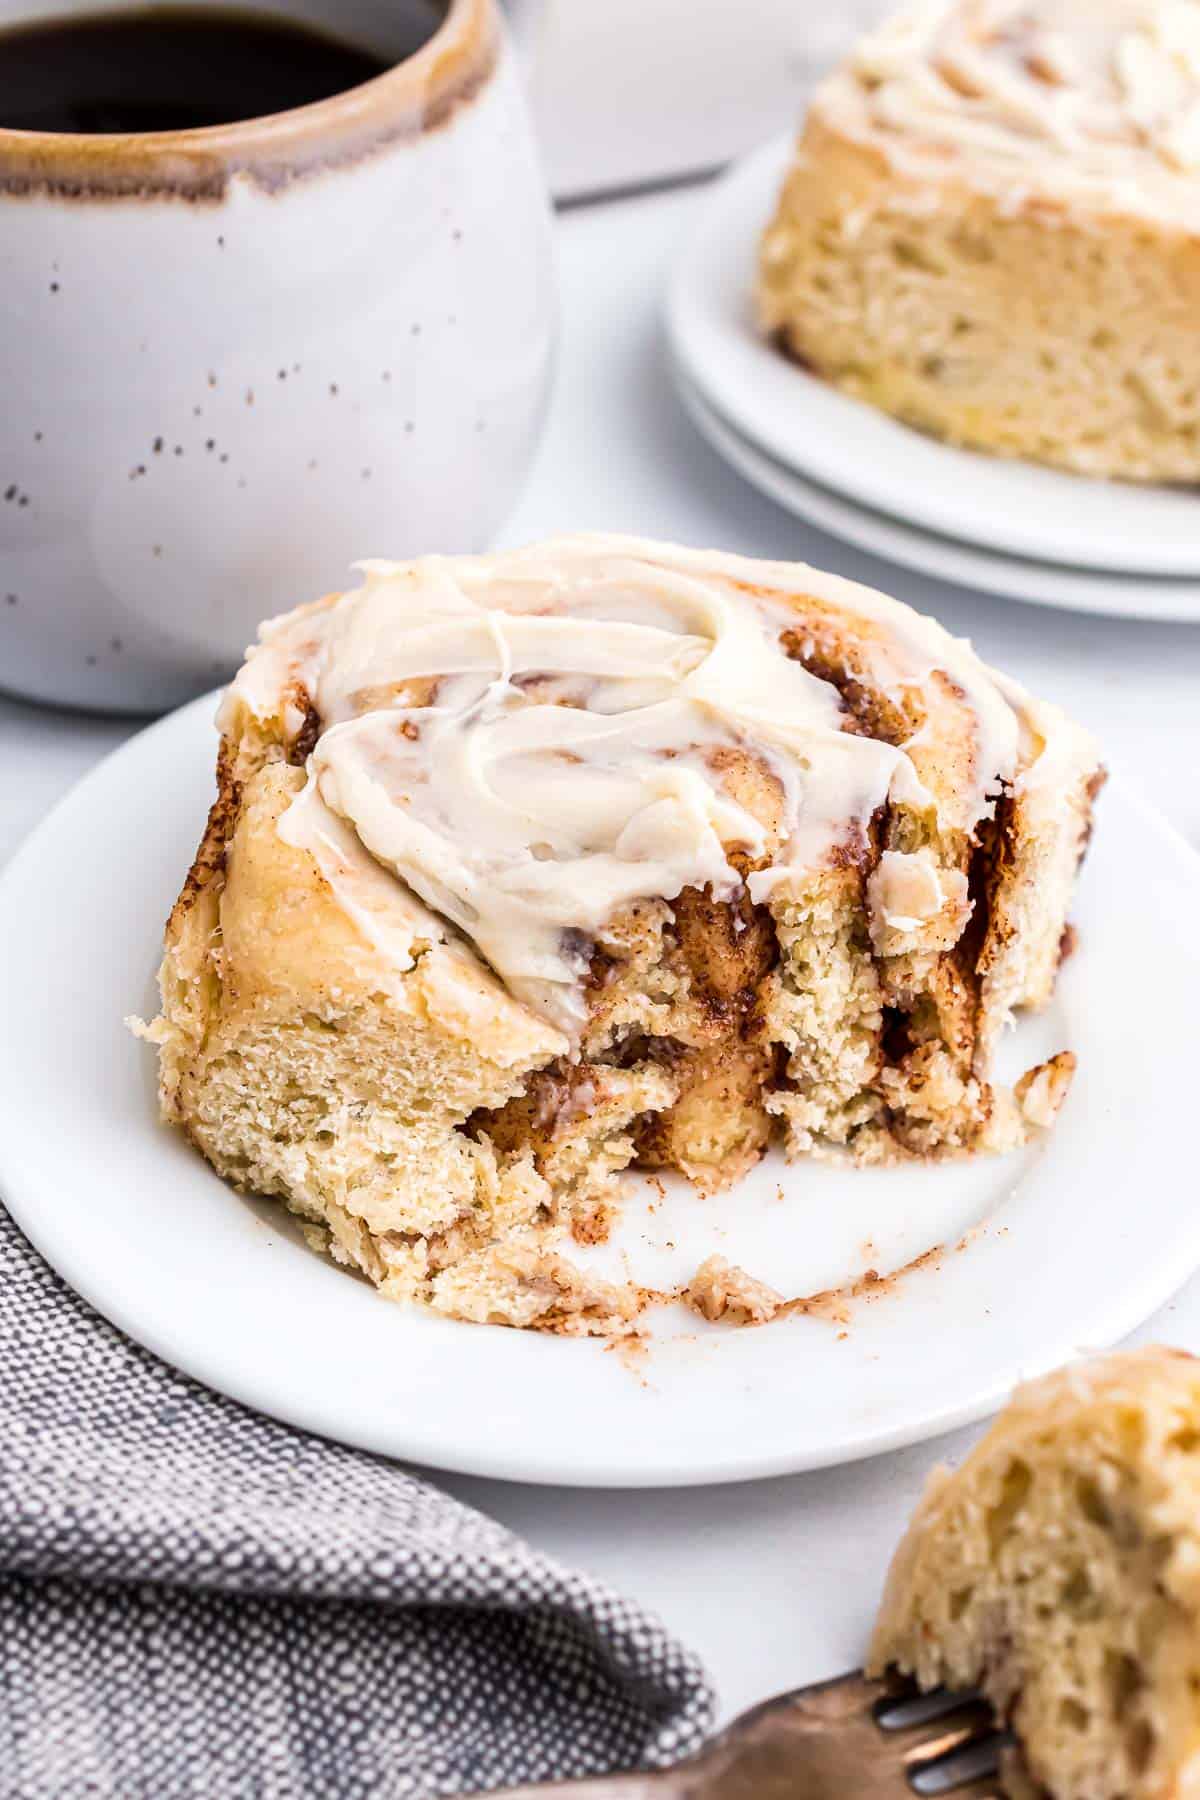 Same-day cinnamon roll, cut to show inner texture.